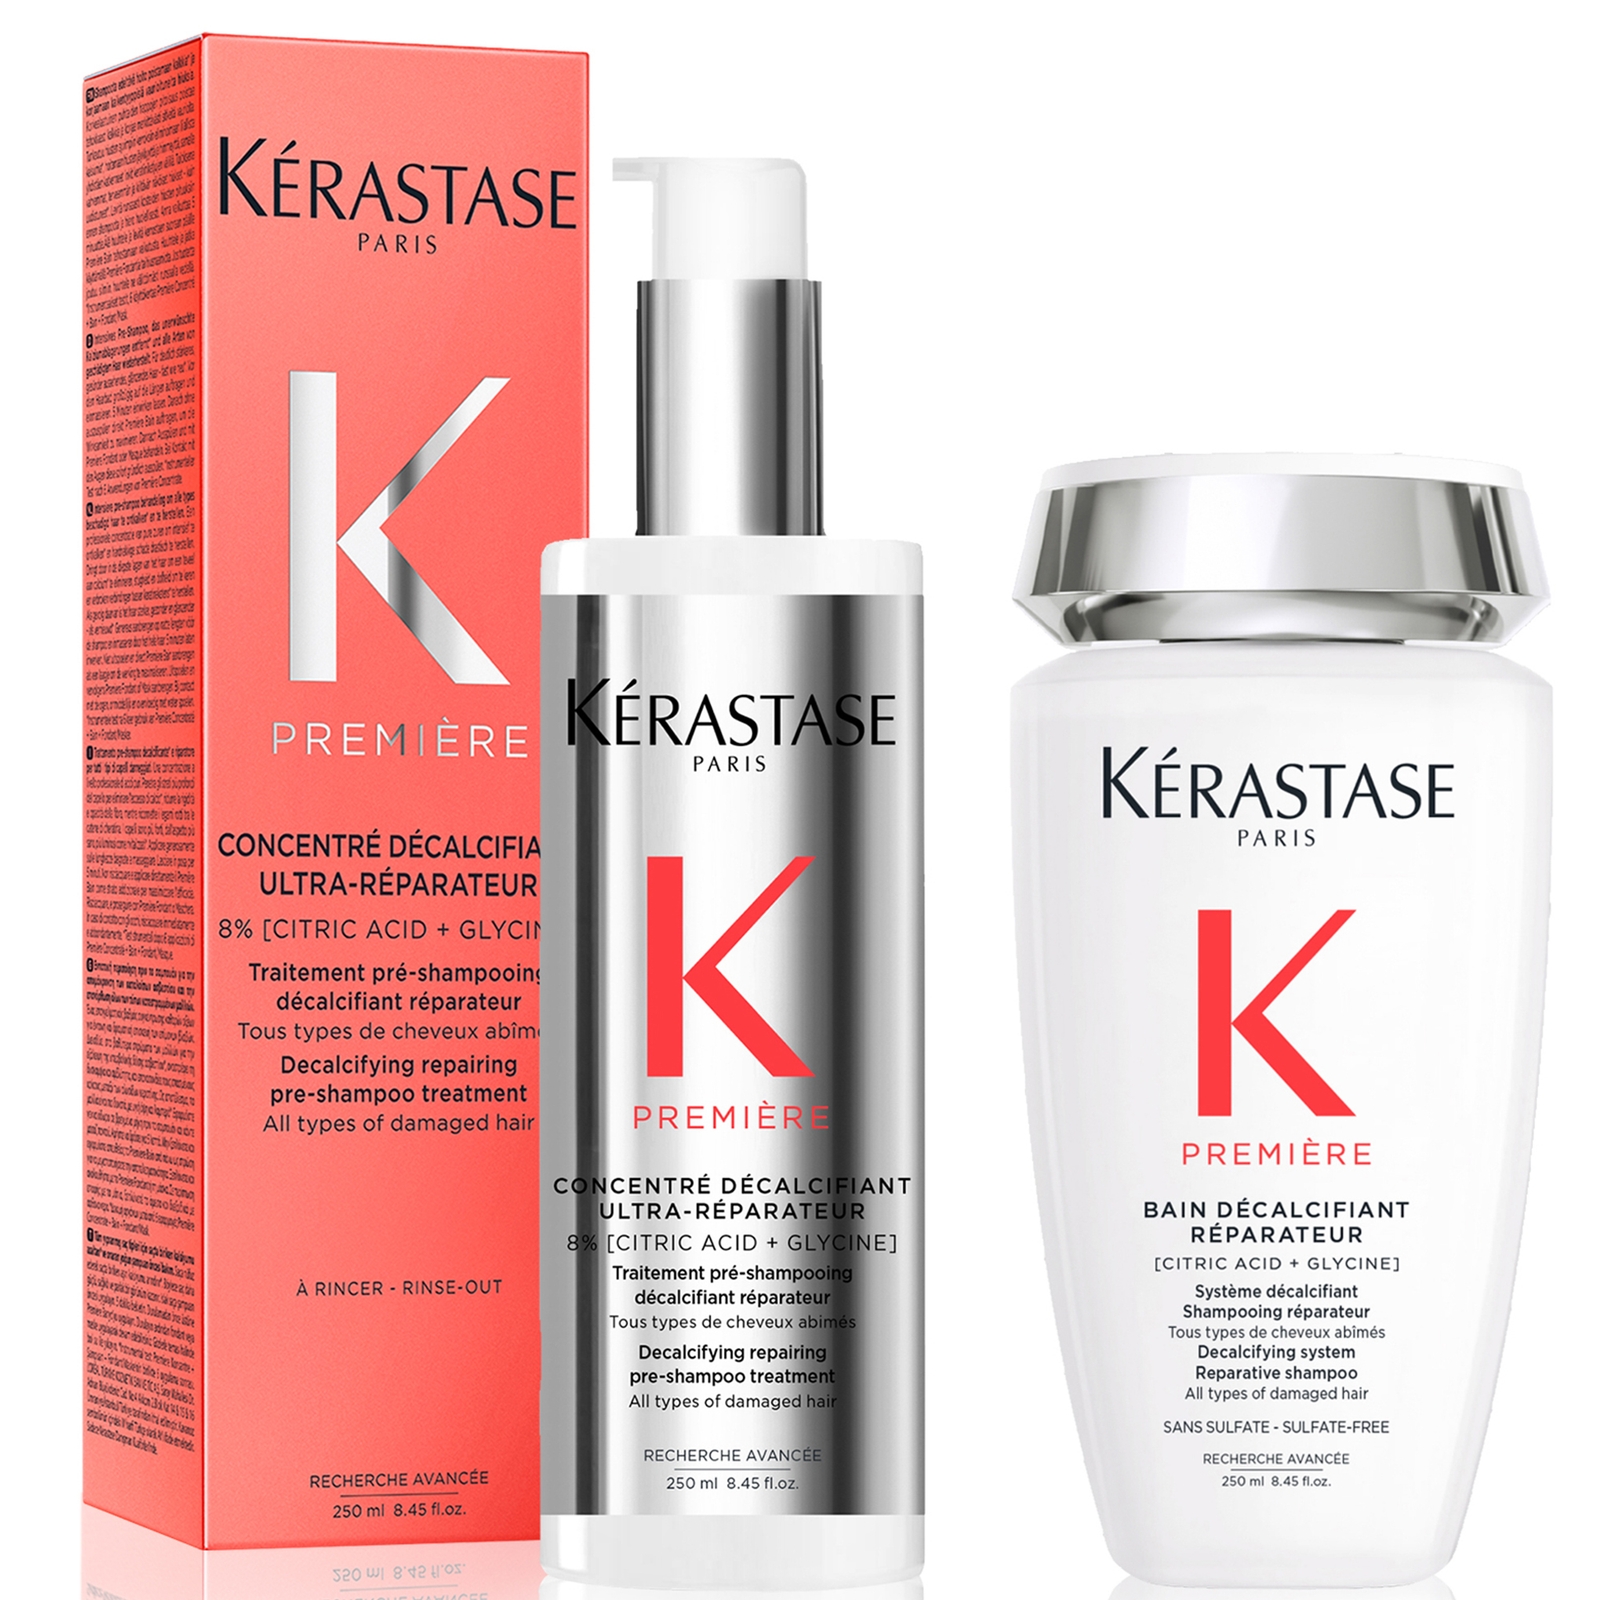 Kerastase Premiere Decalcifying Repairing Pre-Shampoo and Shampoo for Damaged Hair with Pure Citric 